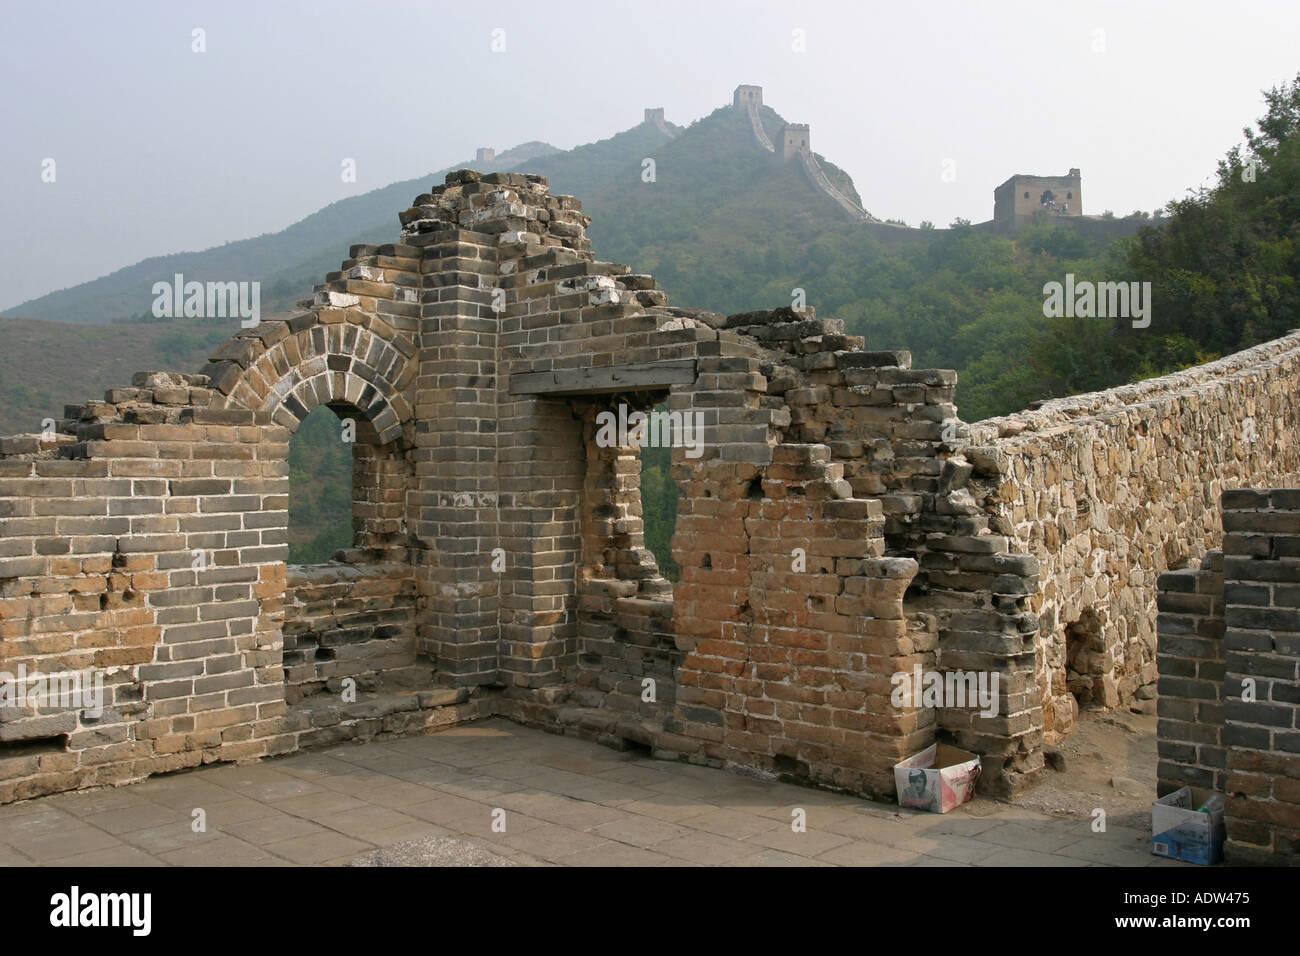 Decaying ruined stone walls on the Great Wall of China at Simitai near Beijing Asia Stock Photo